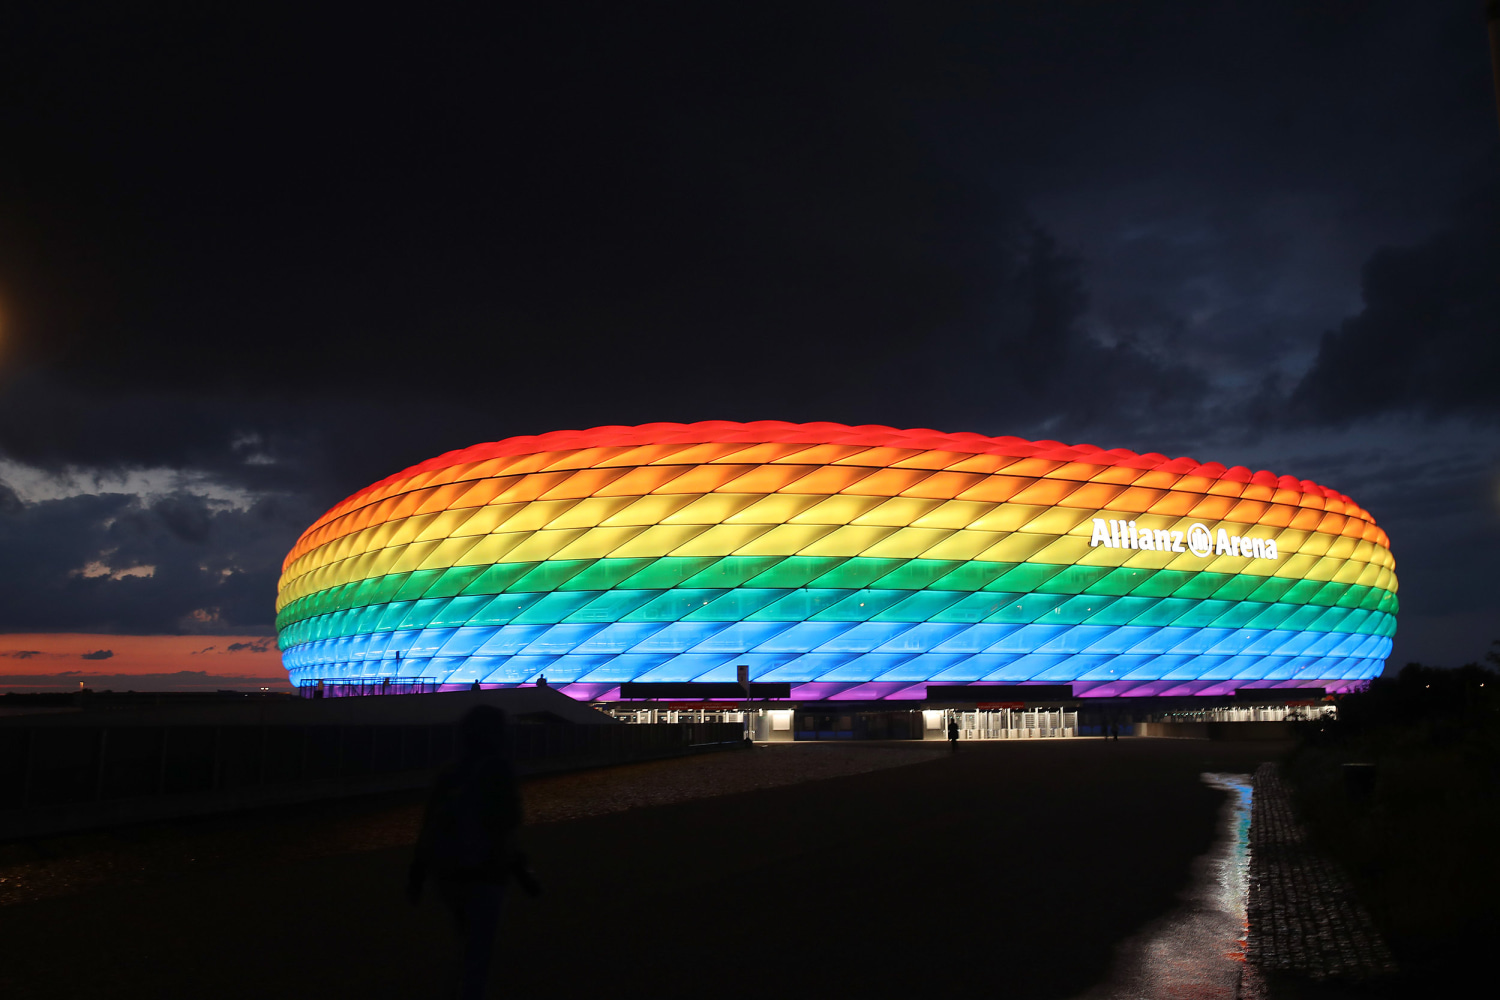 Euro 2020: Proposal to light up Munich arena in LGBTQ colors – DW –  06/19/2021